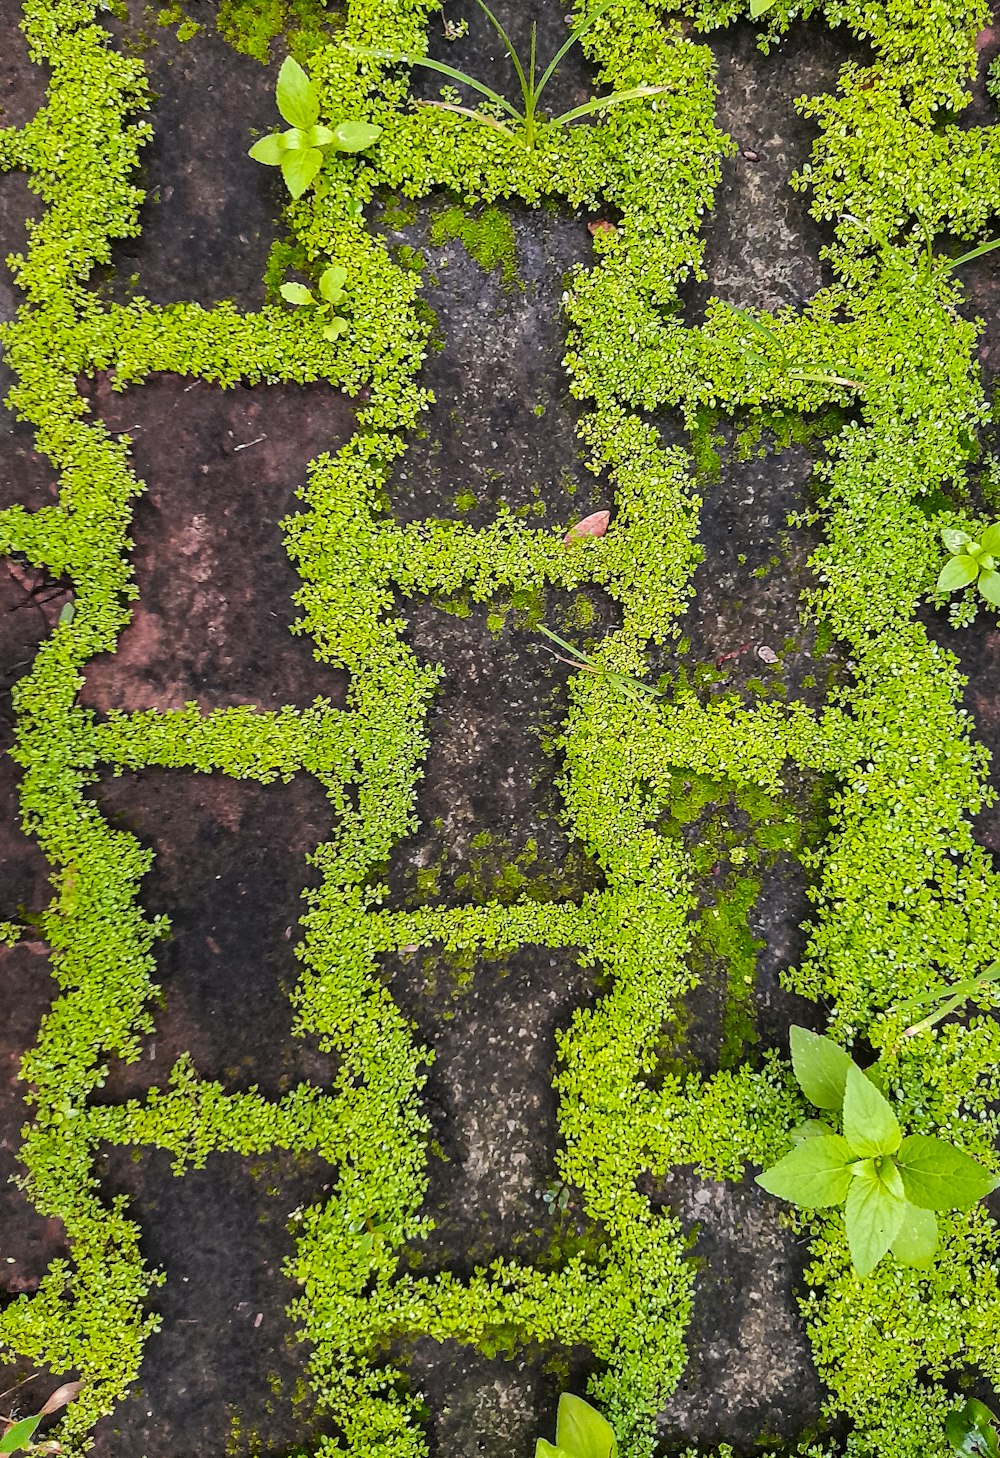 a close up of a plant growing on a brick walkway